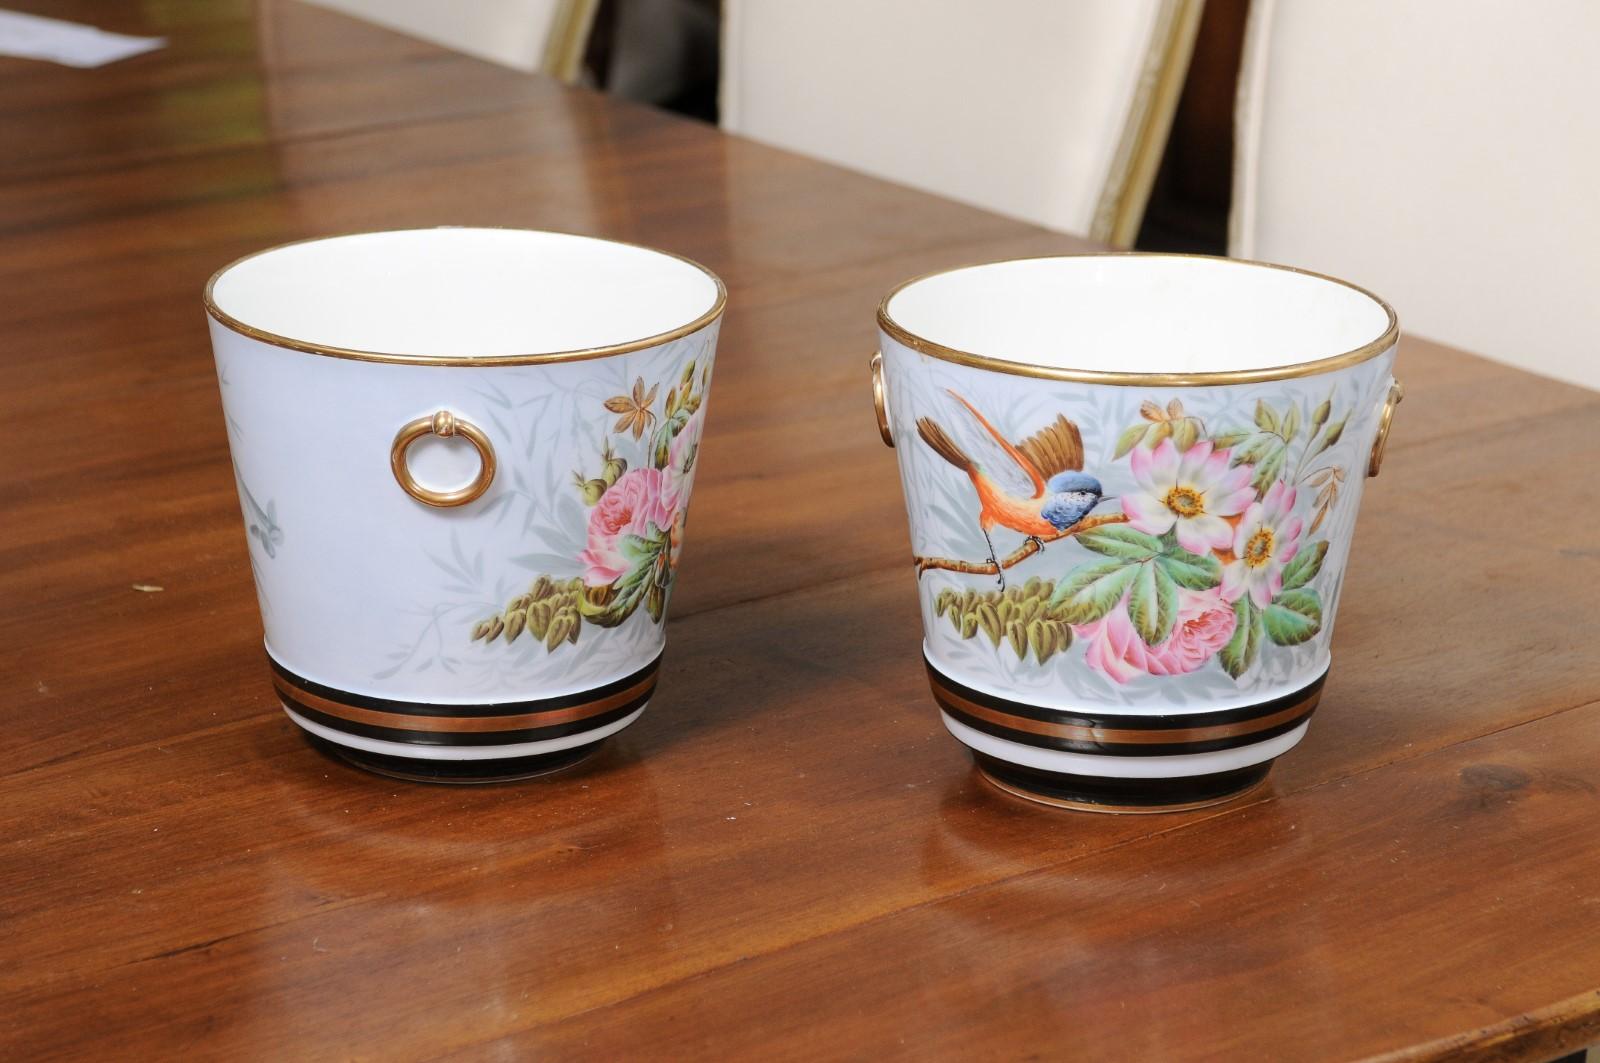 A pair of Porcelain de Paris cachepots planters from the 19th century, with hand-painted bird and floral motifs, and gilt accents. Created in France during the 19th century, each of this pair of cachepots features a circular tapering body, adorned